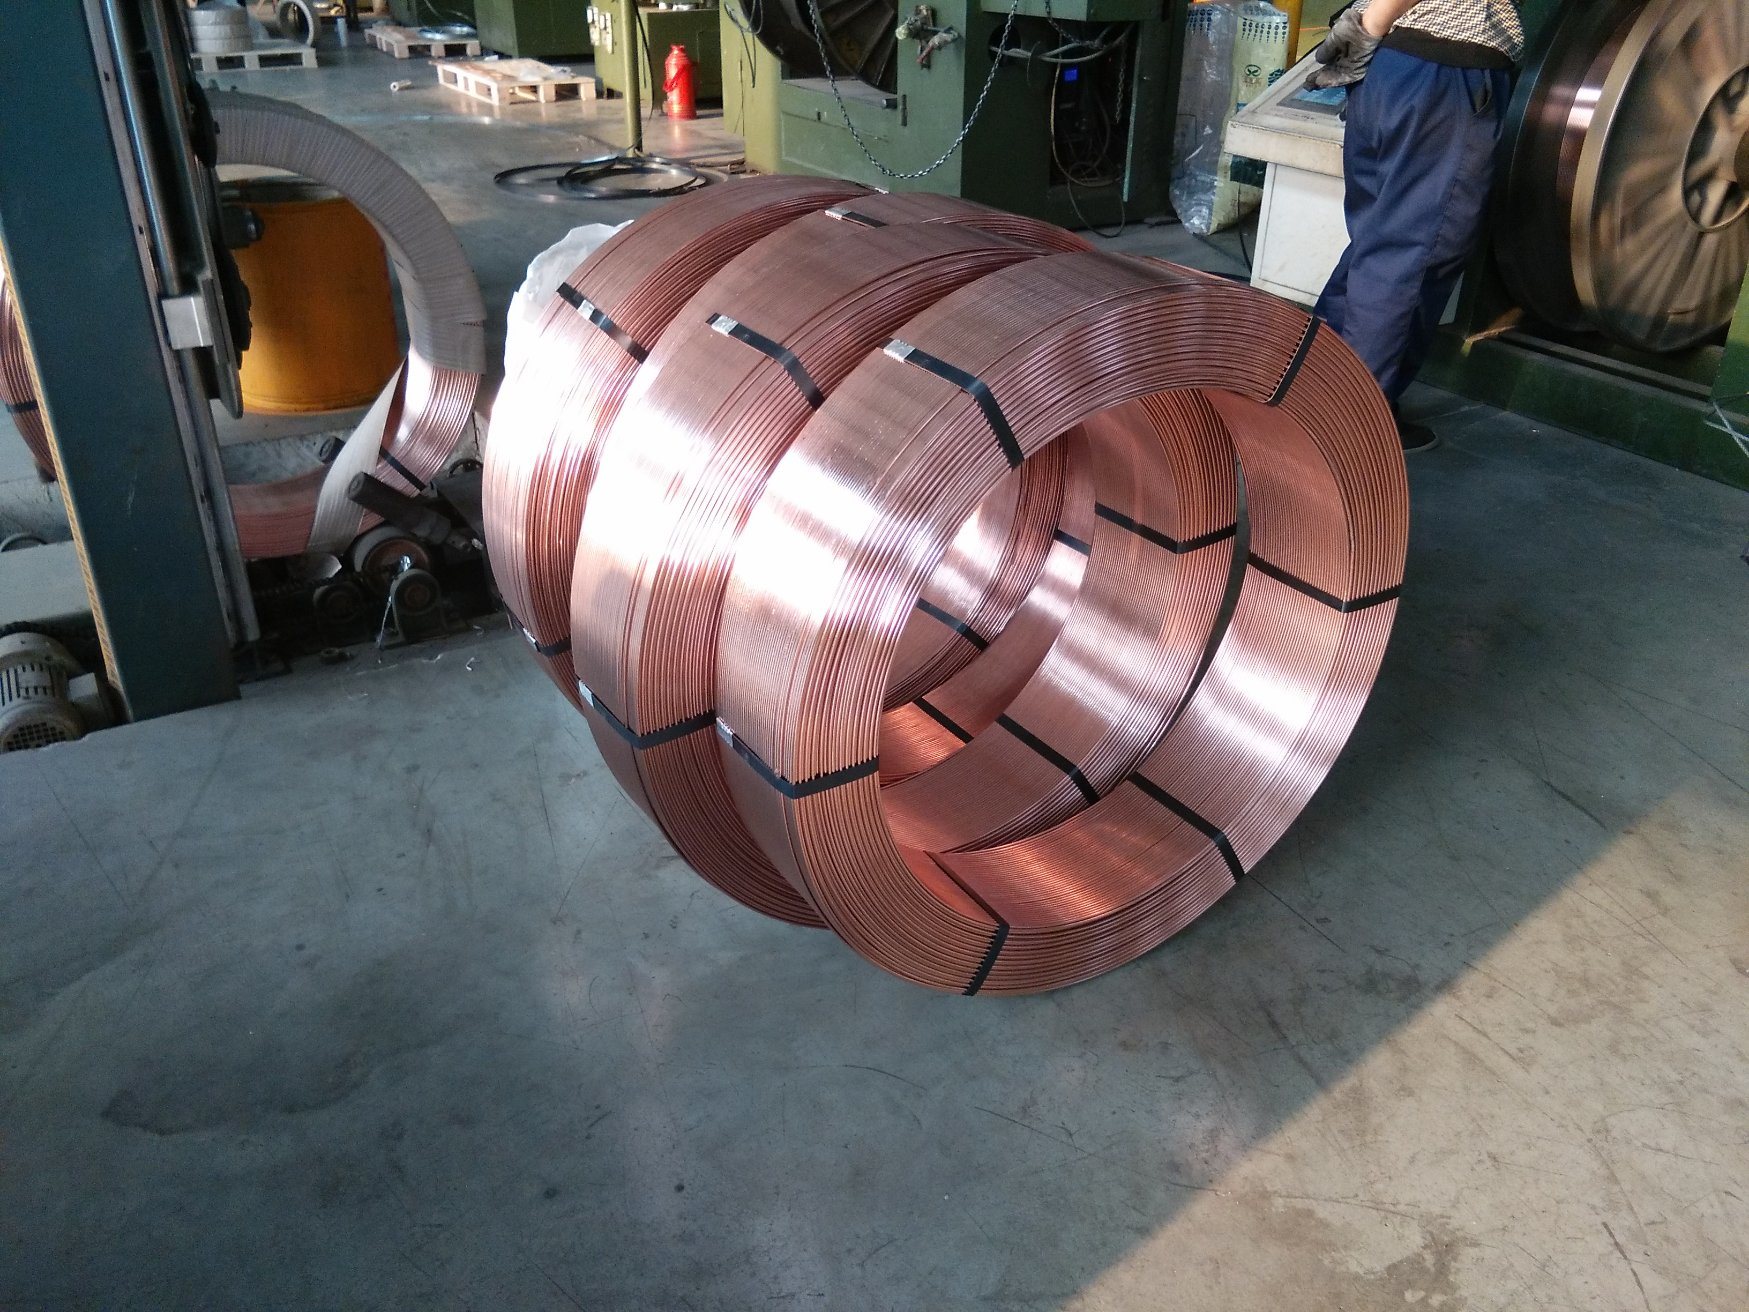 Saw H08A/Aws EL8 Alloy Steel Submerged Arc Welding Wire